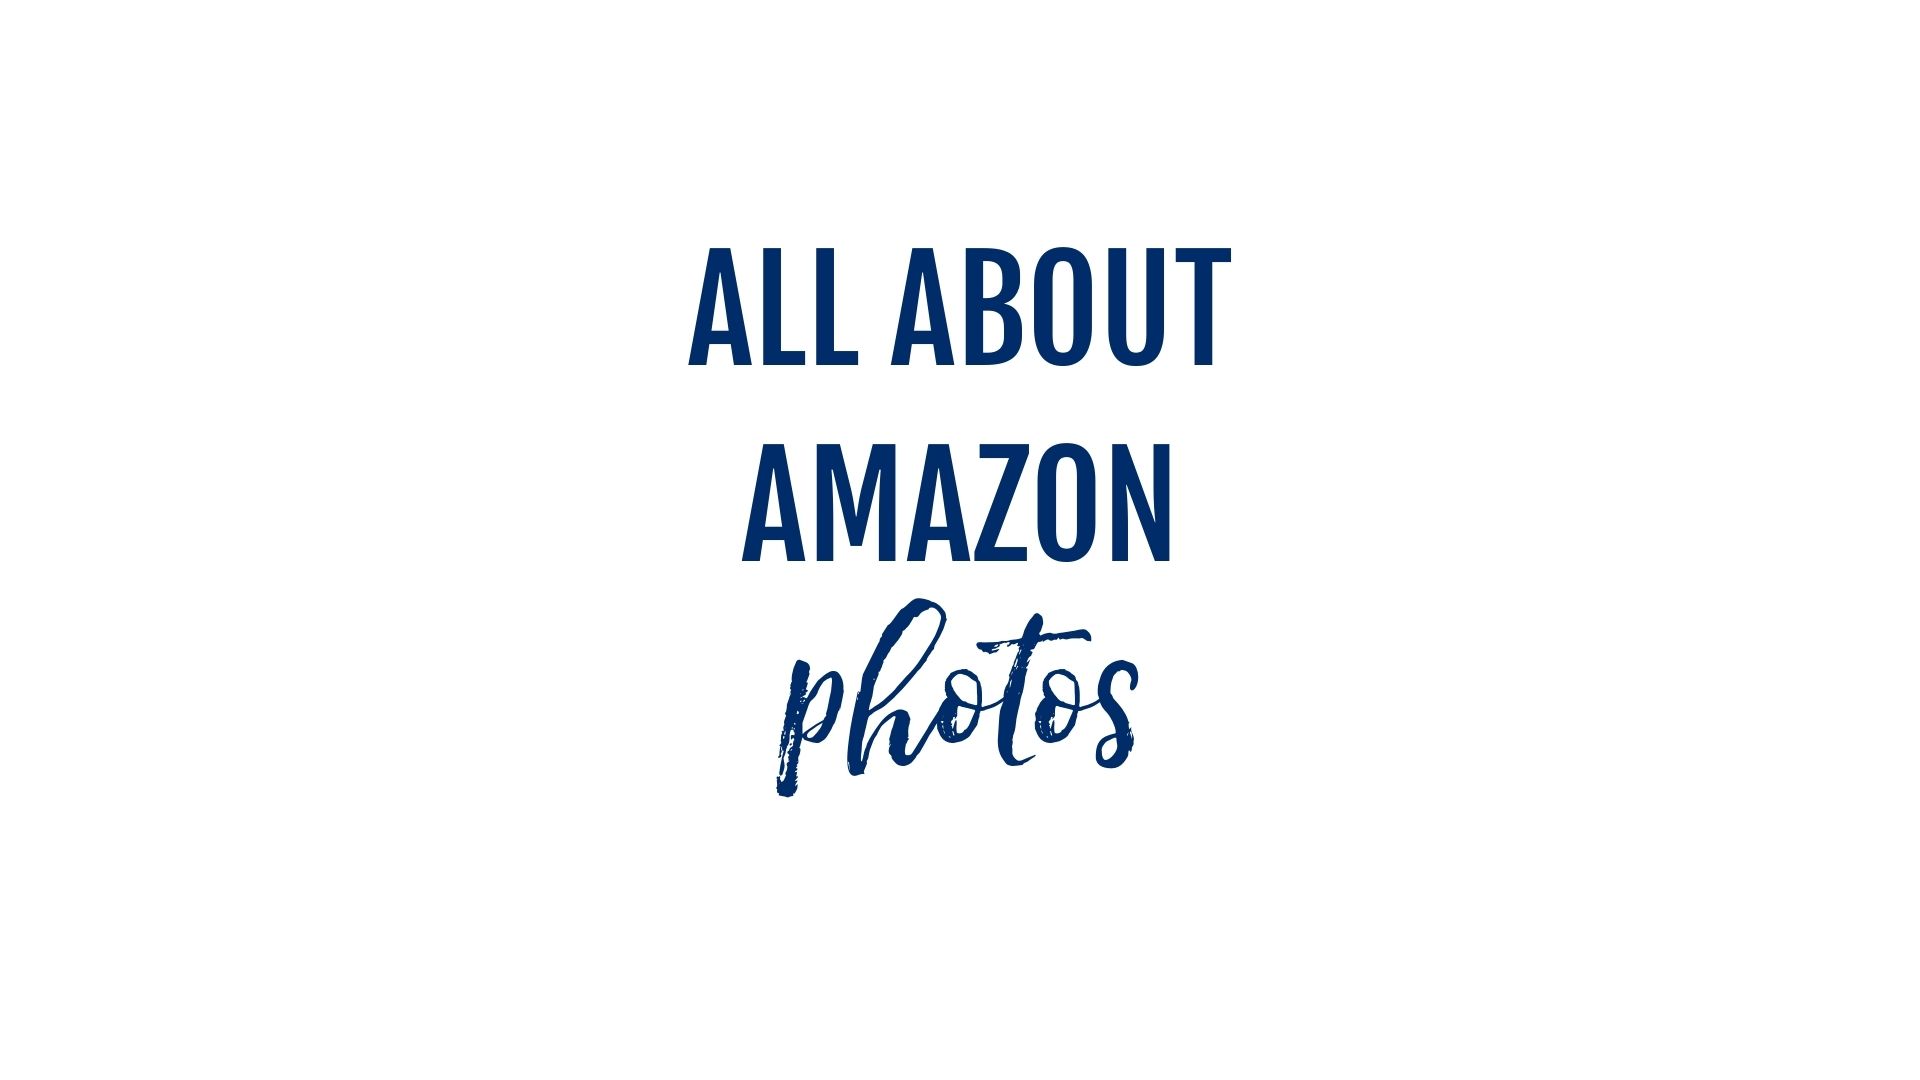 Learn more about the fun features of Amazon Photos.